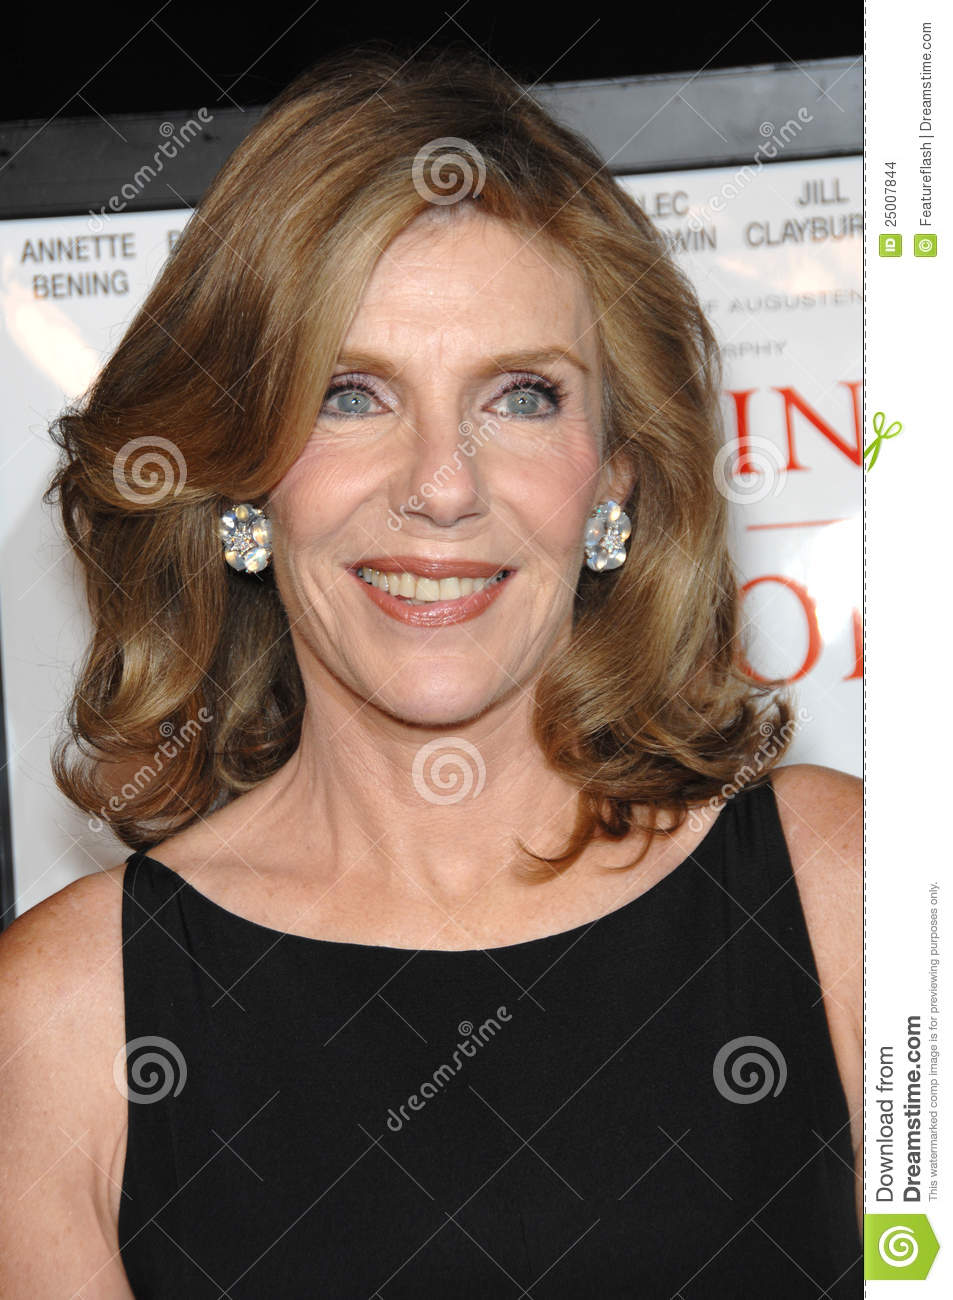 jill-clayburgh-images